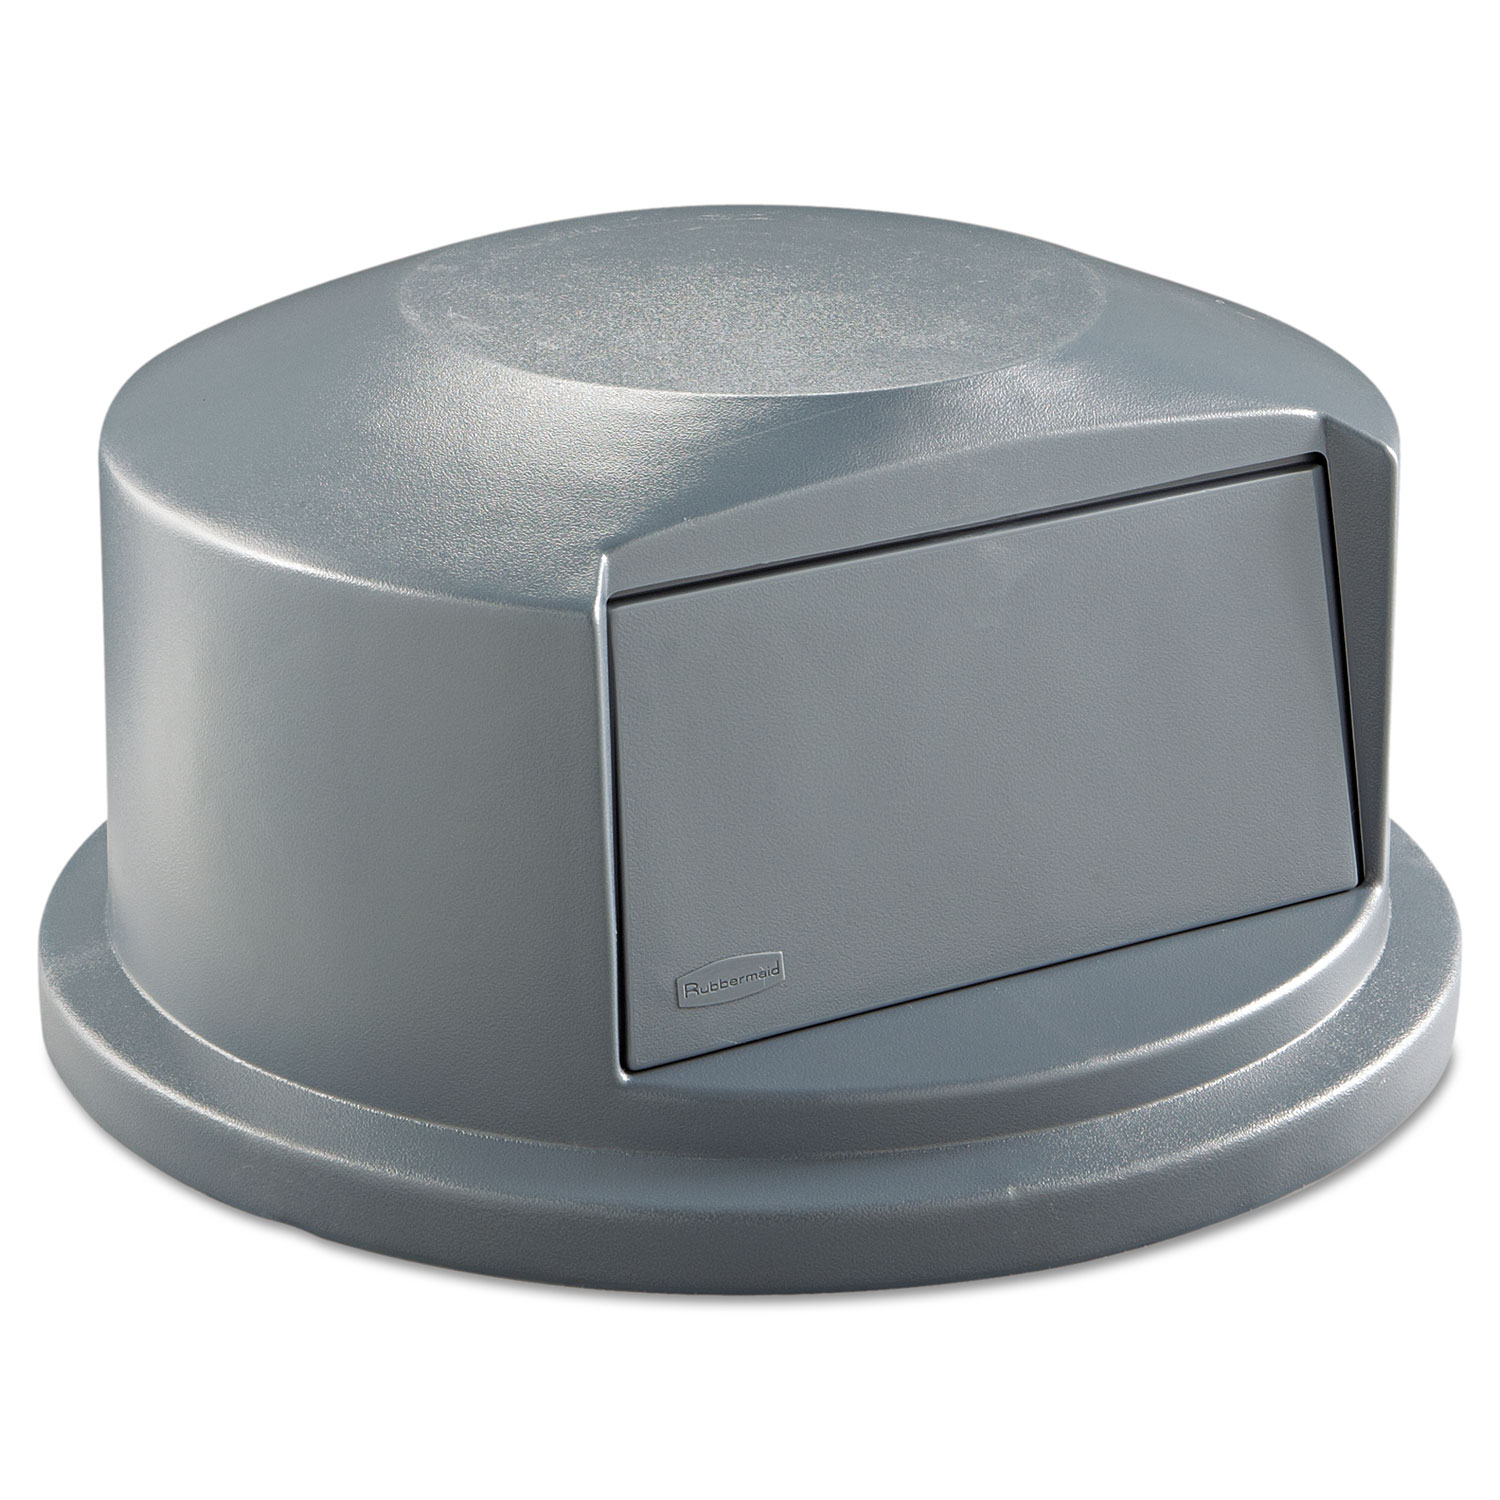  Rubbermaid Commercial 264788GRAY Round BRUTE Dome Top Receptacle, Push Door, 24.81w x 12.63h, Gray (RCP264788GRA) 